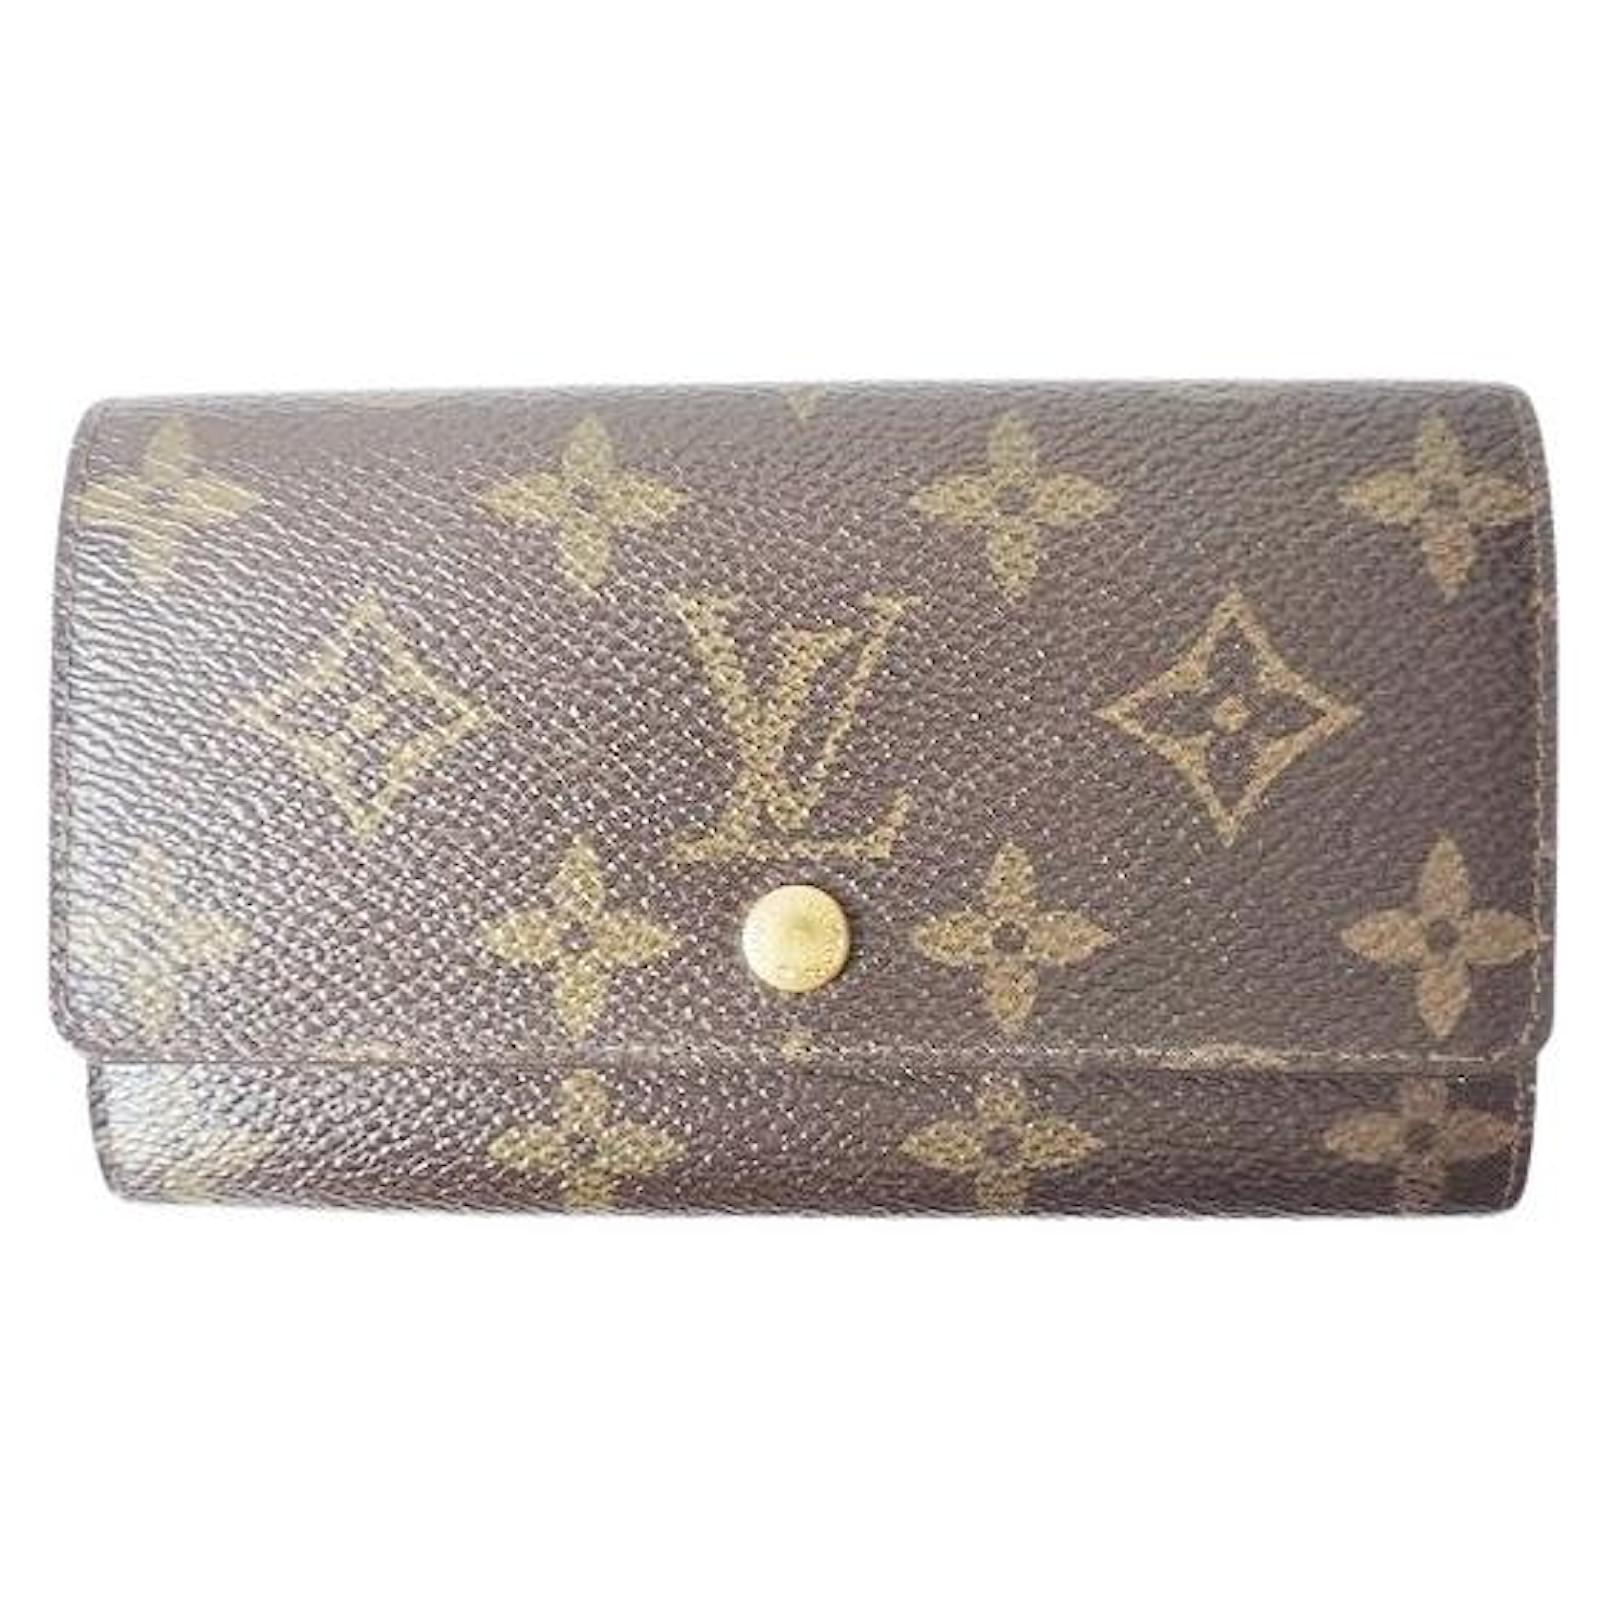 Louis Vuitton key holder/ Multicles 6 Damier Azur Reveal and